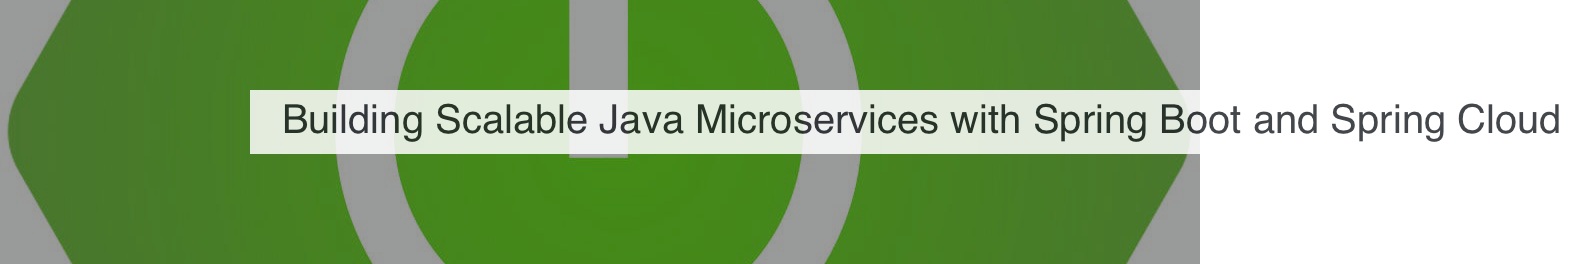 Building Scalable Java Microservices 